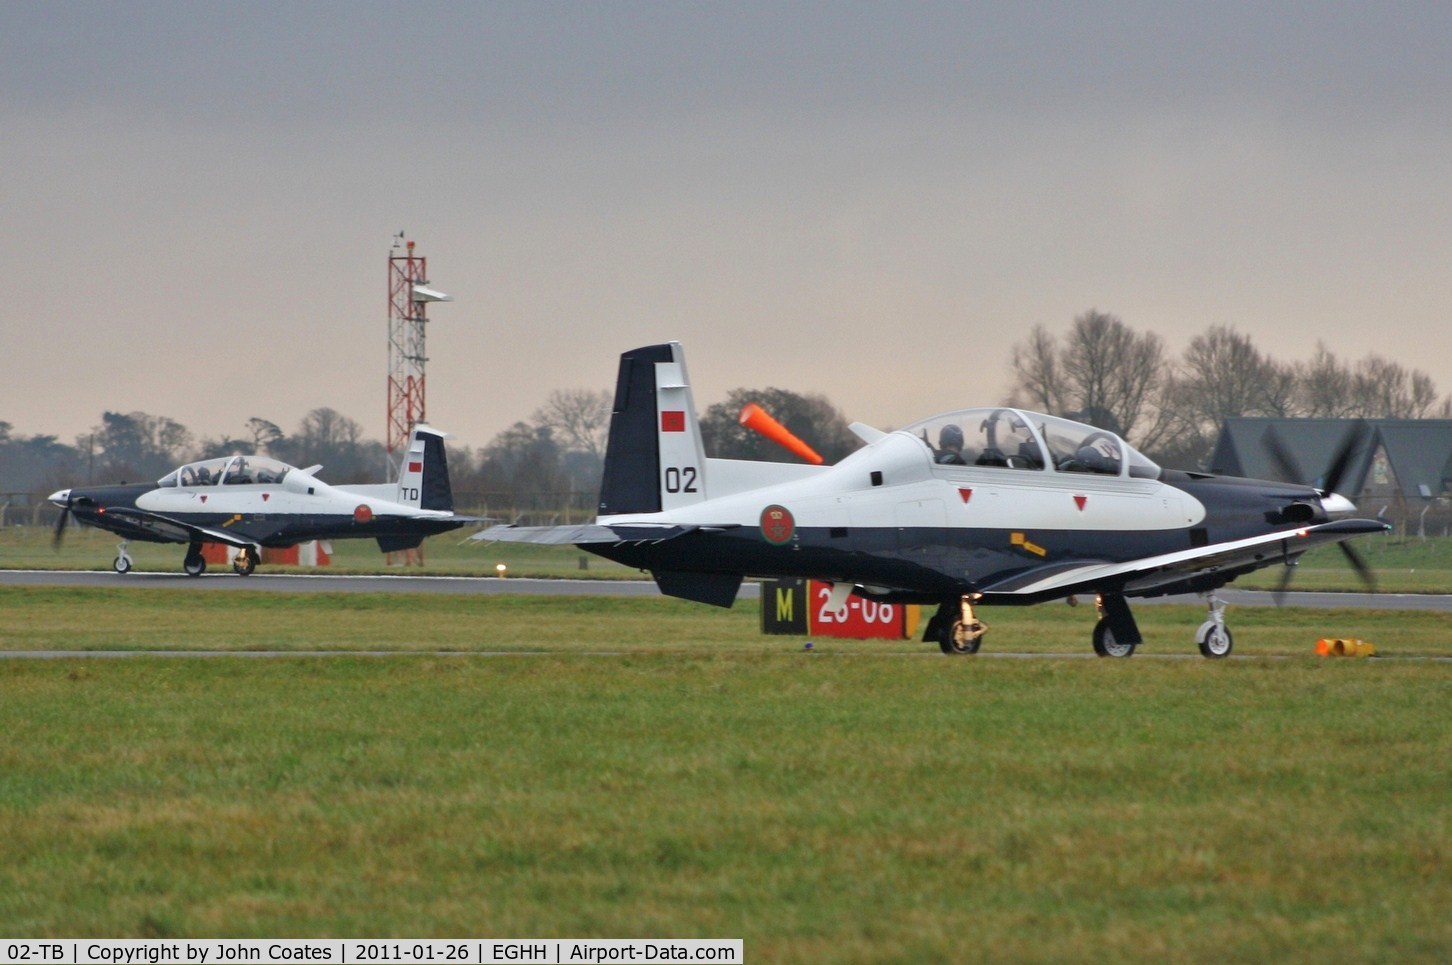 02-TB, 2010 Raytheon T-6C Texan II C/N PM-2, Departing on delivery with 04-TD